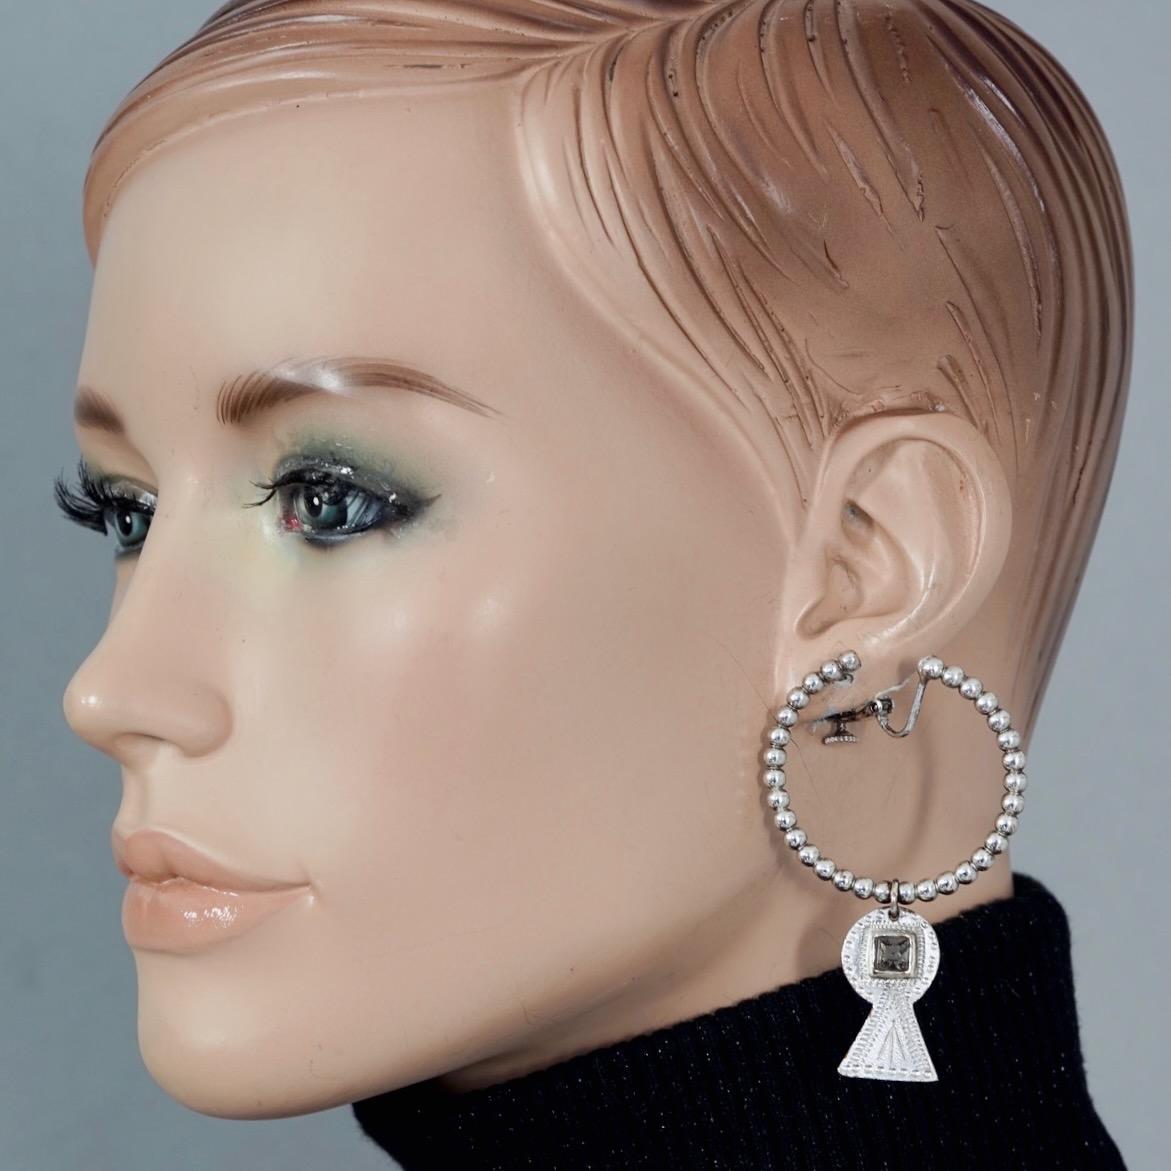 Vintage JEAN PAUL GAULTIER Tribal Creole Charm Silver Dangling Earrings

Measurements:
Height: 2.76 inches (7 cms)
Diameter: 1.65 inches (4.2 cms)
Weight per Earring: 14 grams

Features:
- 100% Authentic JEAN PAUL GAULTIER.
- Creole earrings in